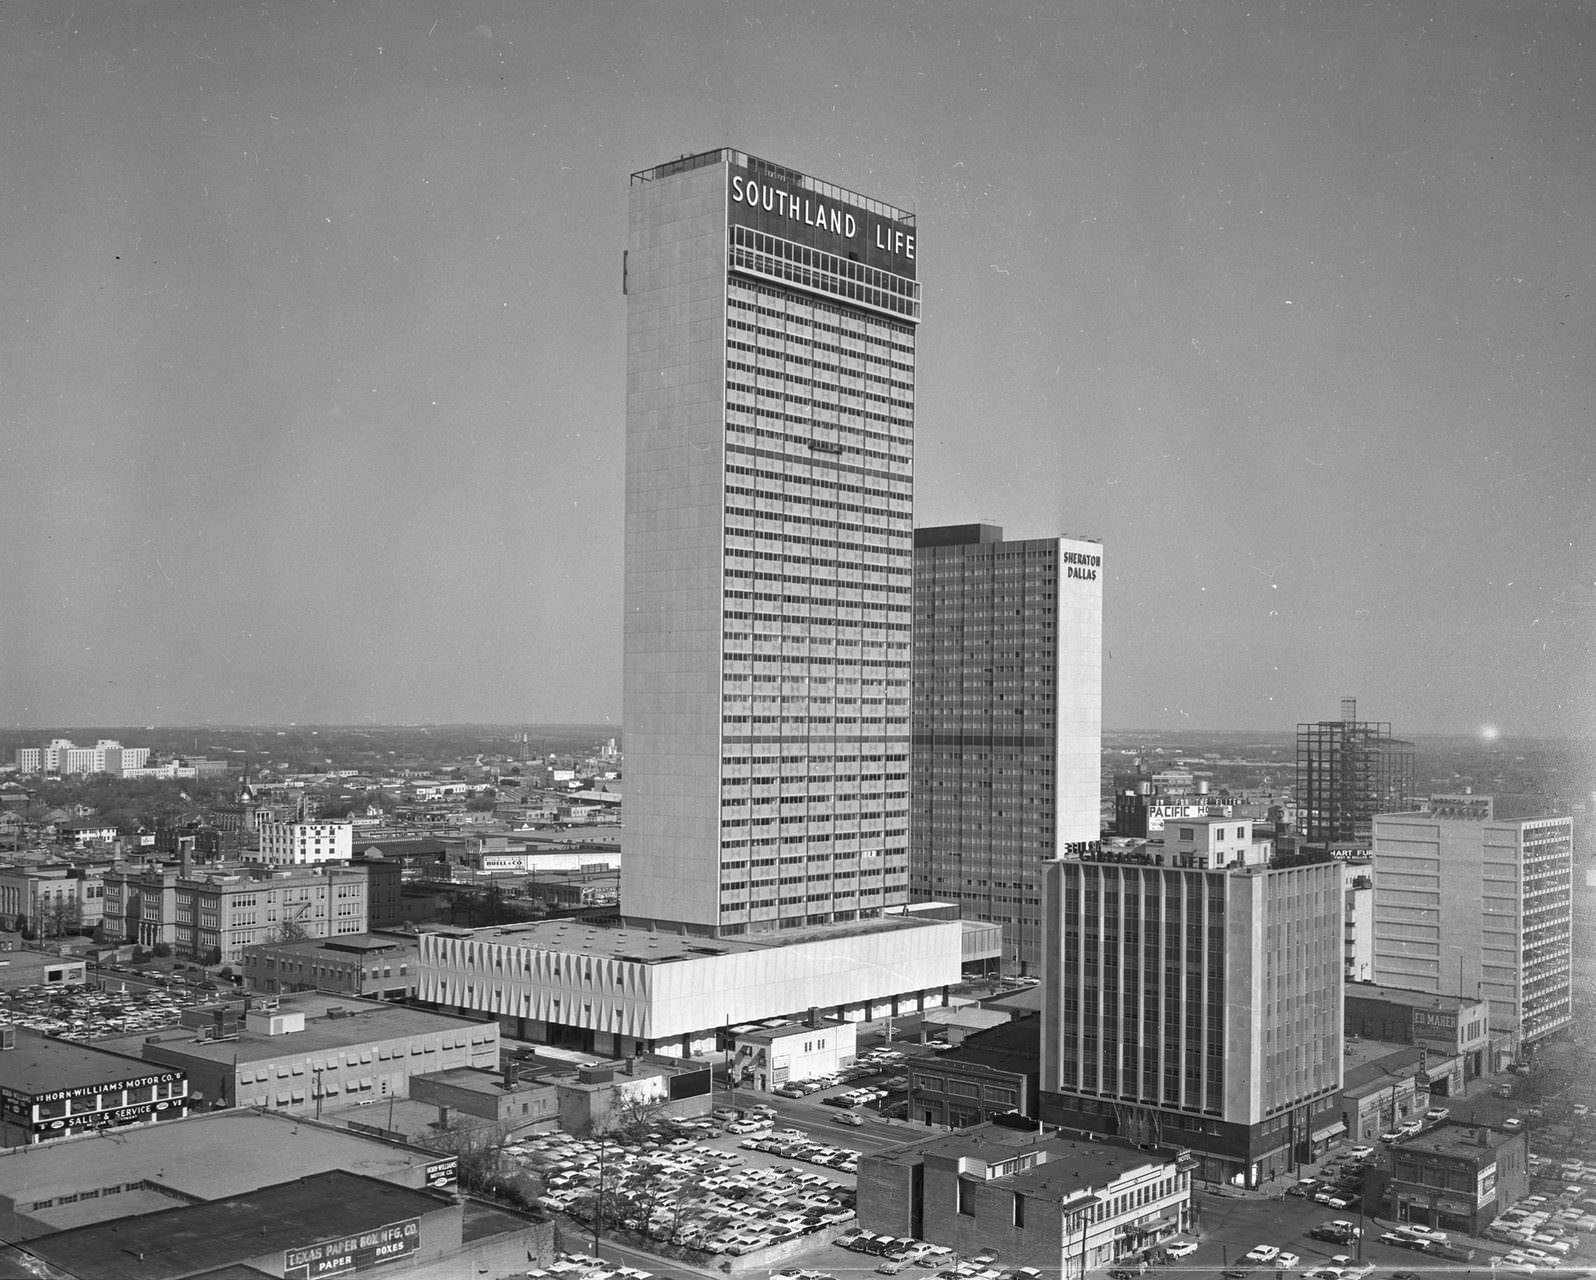 Southland Life and Sheraton Hotel Buildings, 1950